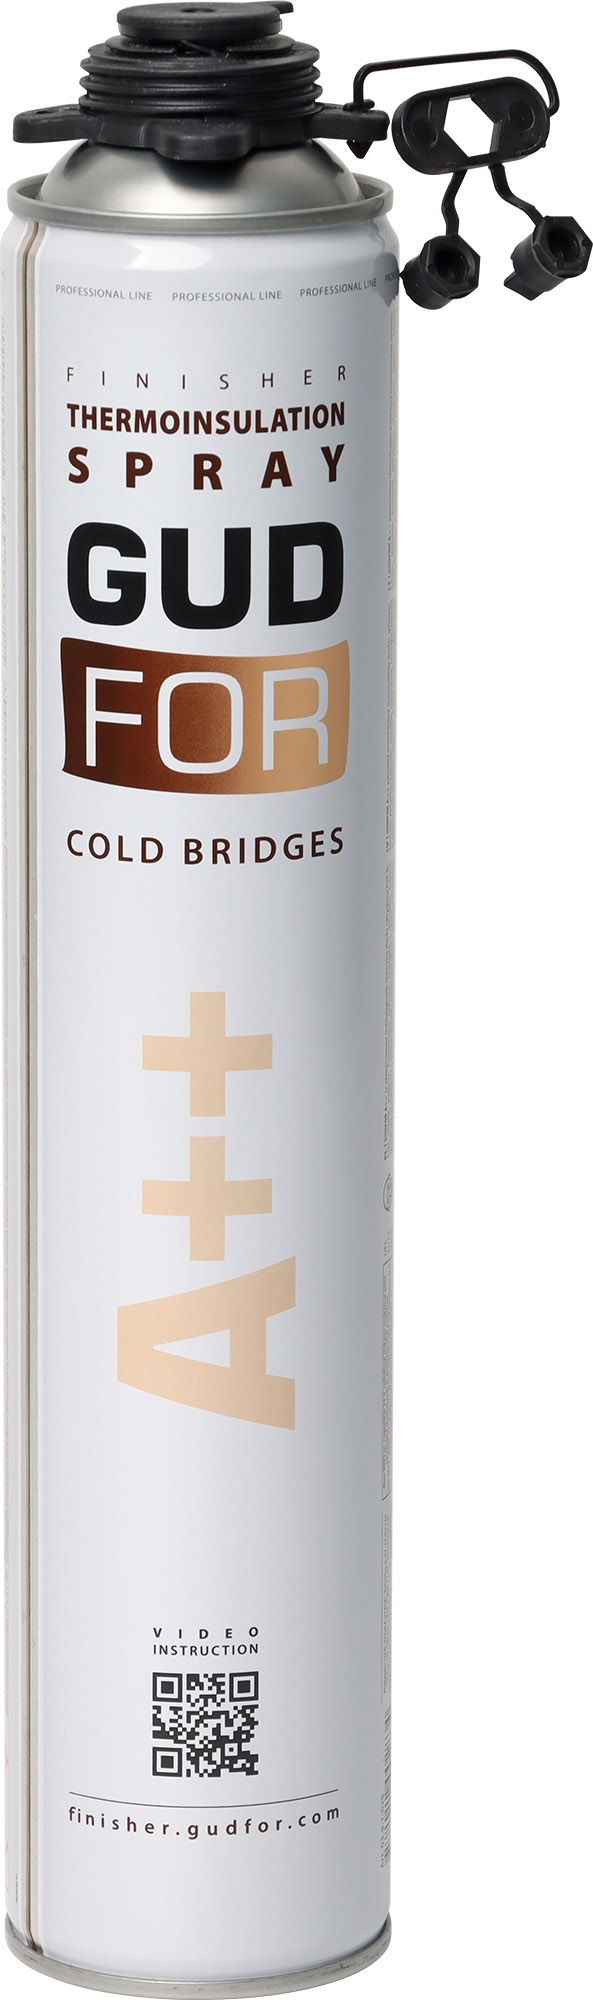 Thermal insulation spray for cold bridges GUDFOR A ++